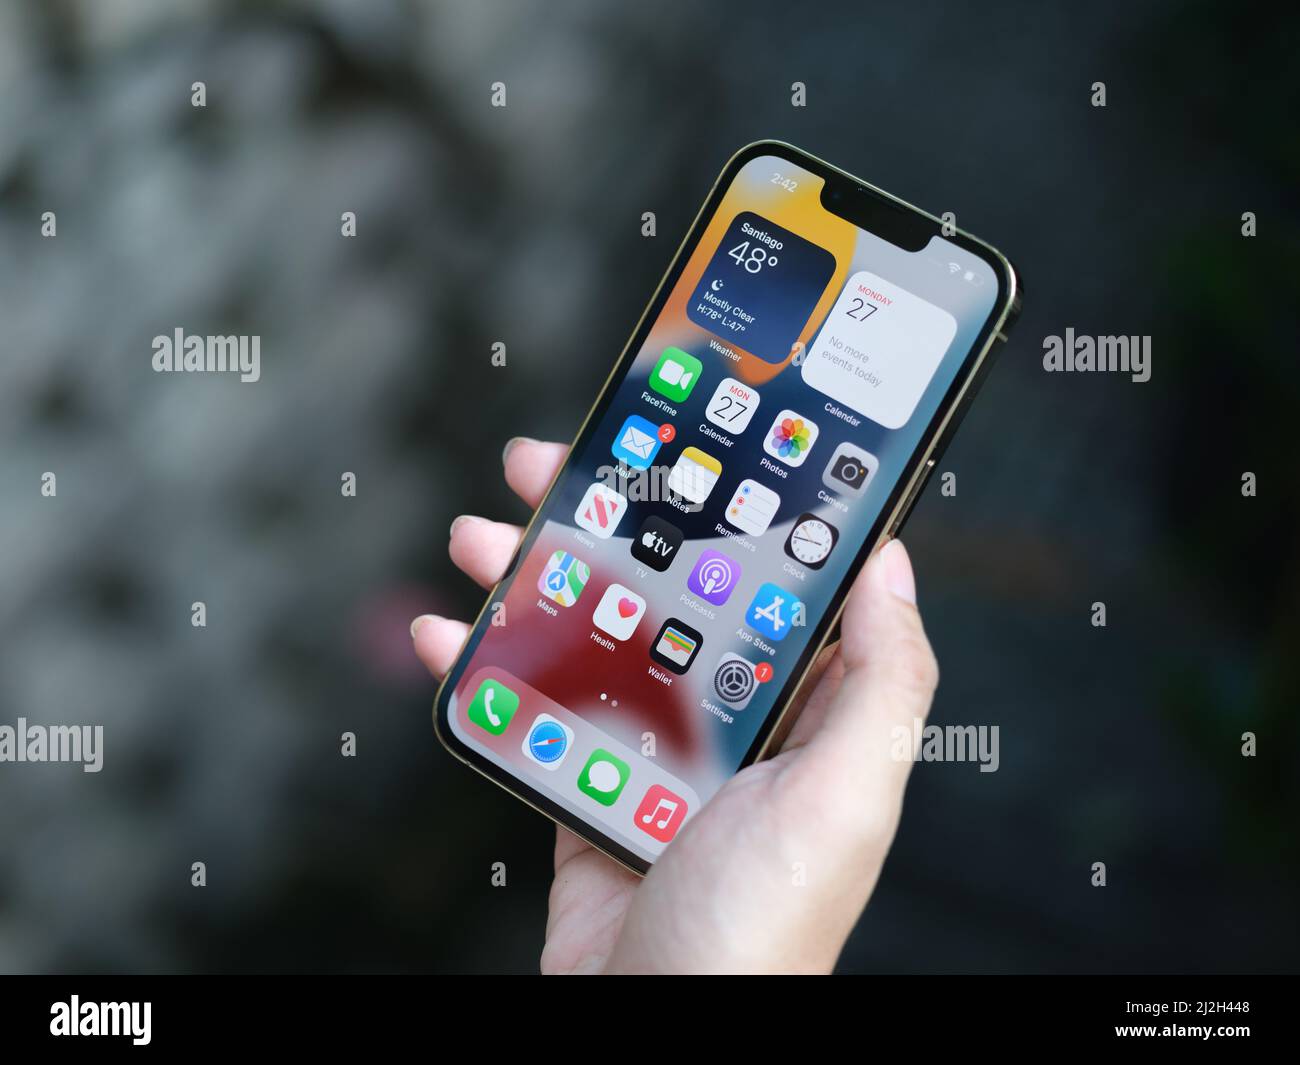 HCMC, Vietnam - August 19, 2021: View of new iPhone 13 or iPhone 13 Pro and Apple Airpods for editorial use Stock Photo